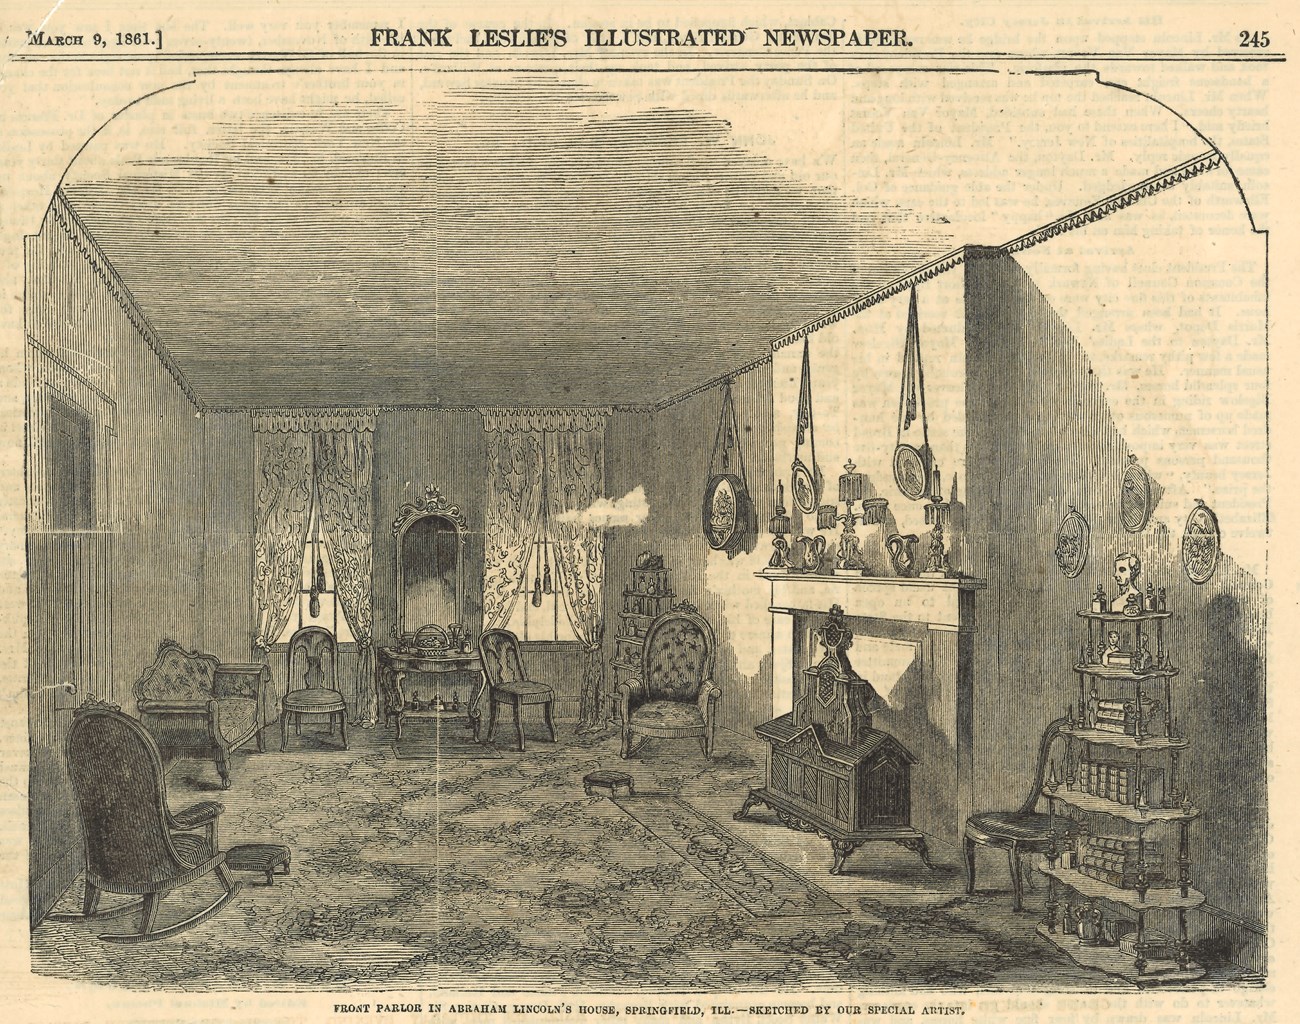 engraving of Lincoln front parlor showing cushioned furniture scattered around room, wall-to-wall carpet with crisscross pattern, fireplace with stove on right wall, and windows with floor to ceiling curtains on far wall